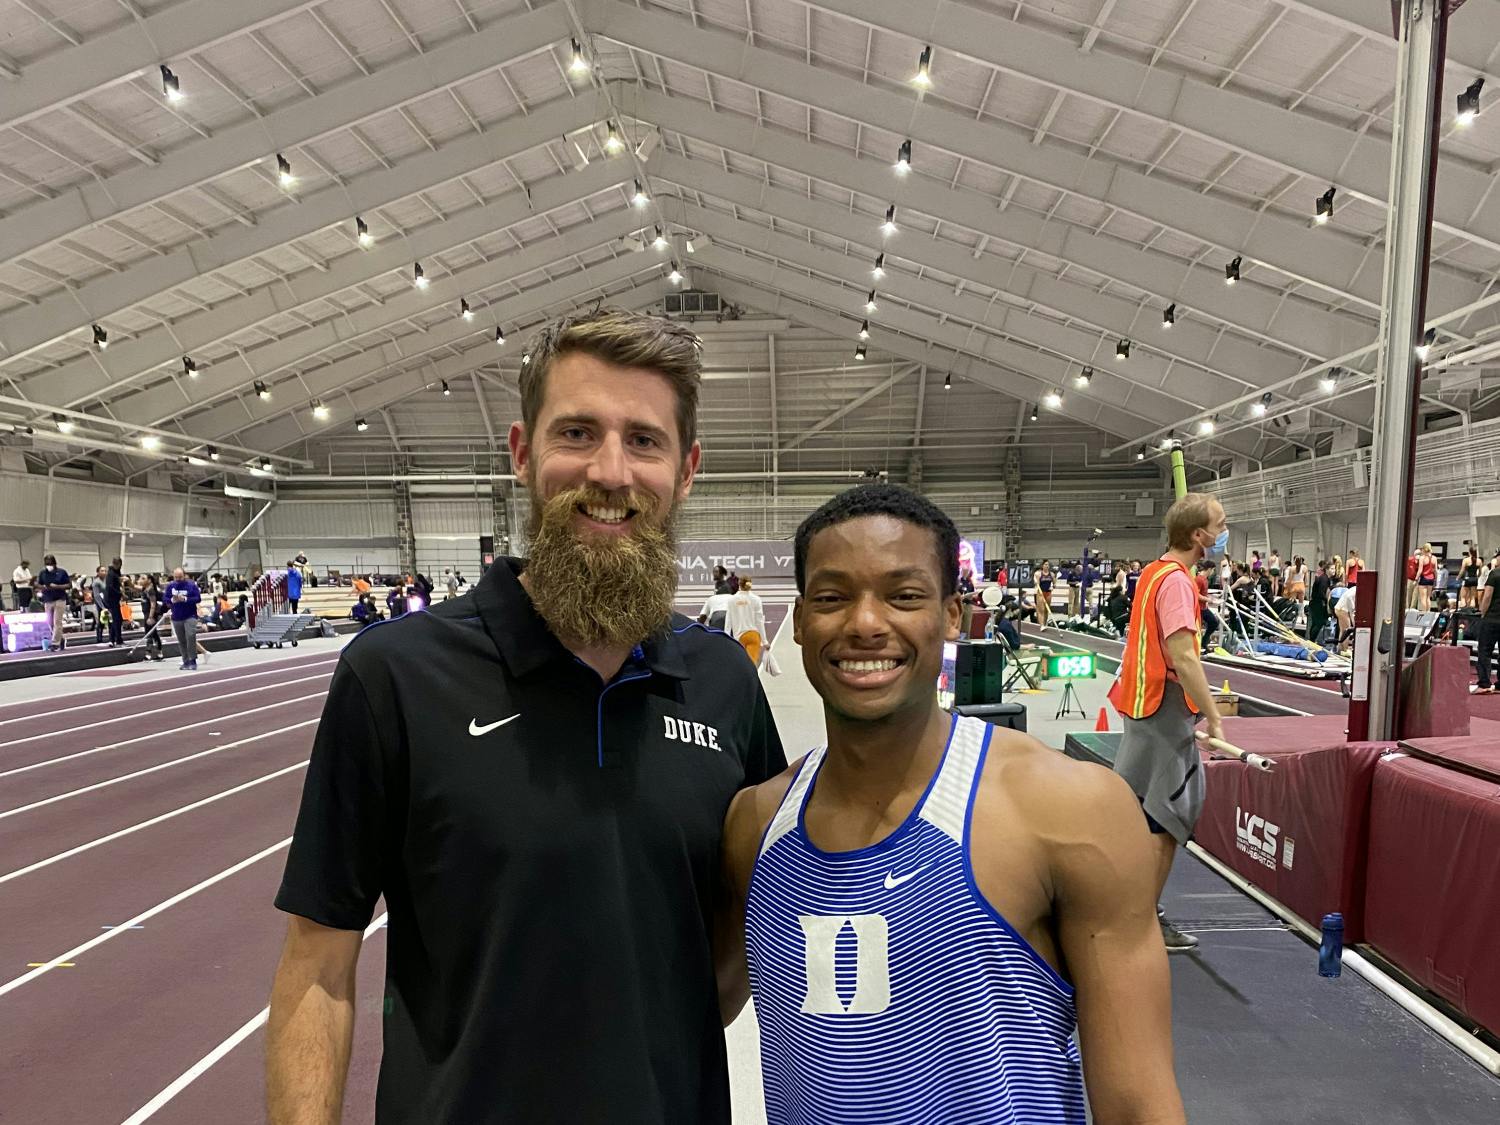 Graduate student Donovan Spearman broke the school record in the 60m dash this weekend. 